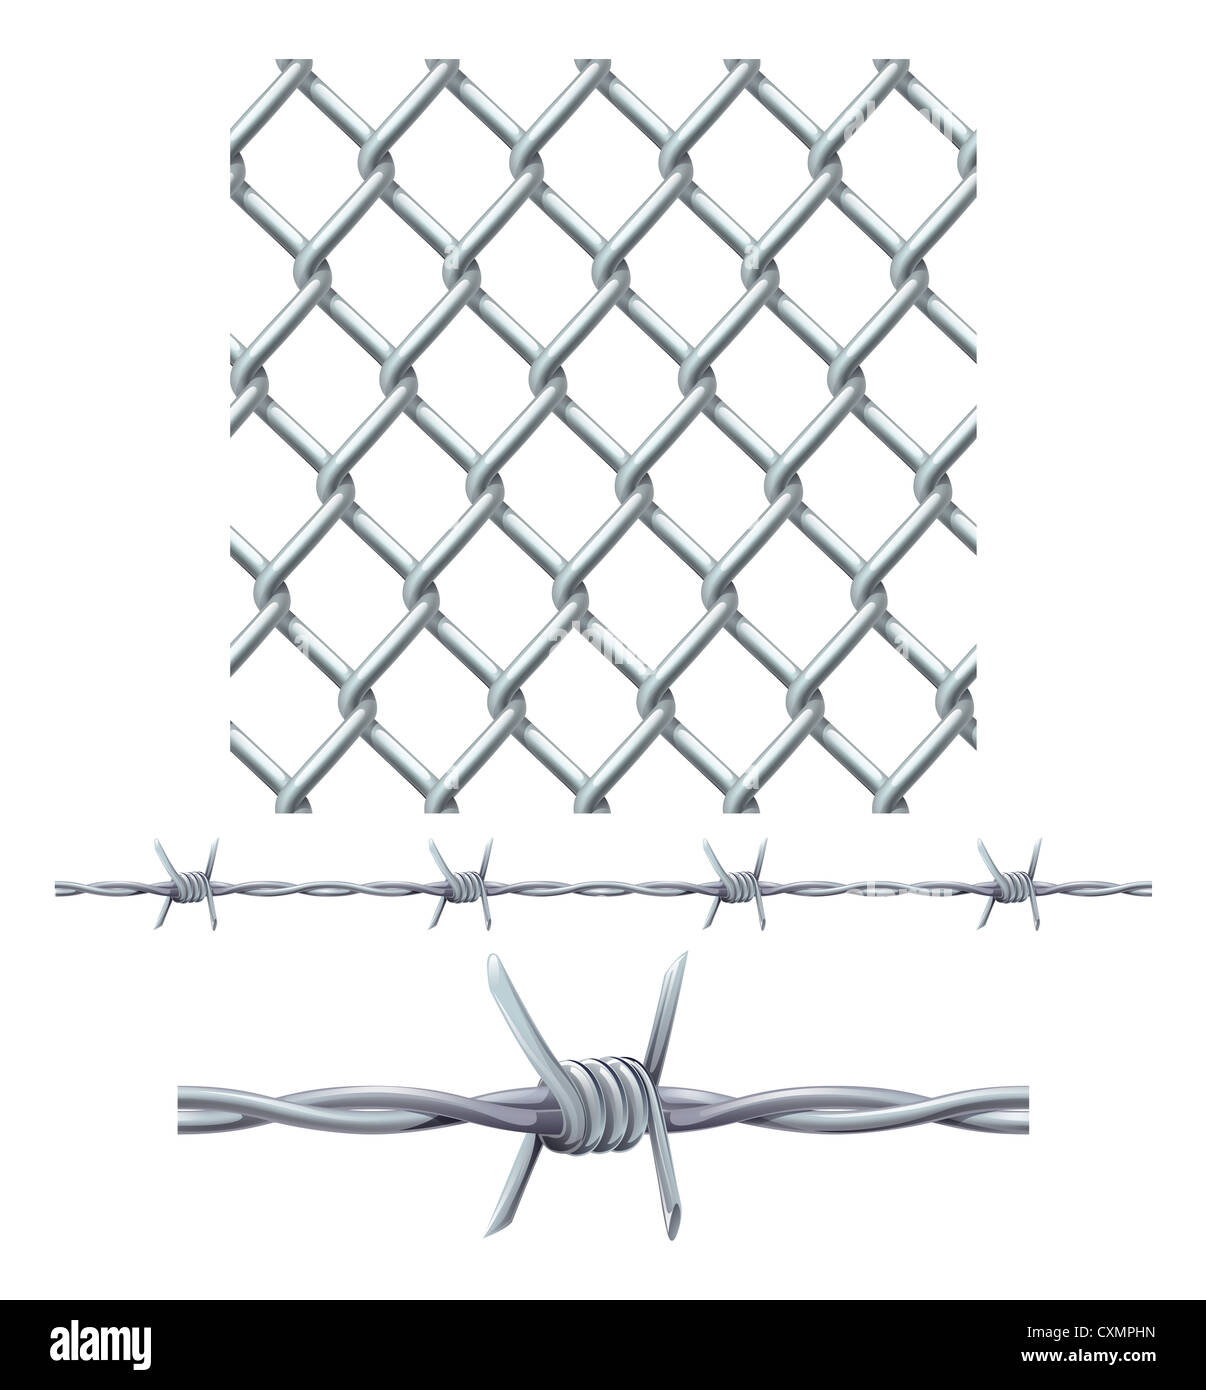 20+ Barbed Wire Tattoo Designs for Women and Men | Barbed wire tattoos,  Tattoos, Leg tattoos